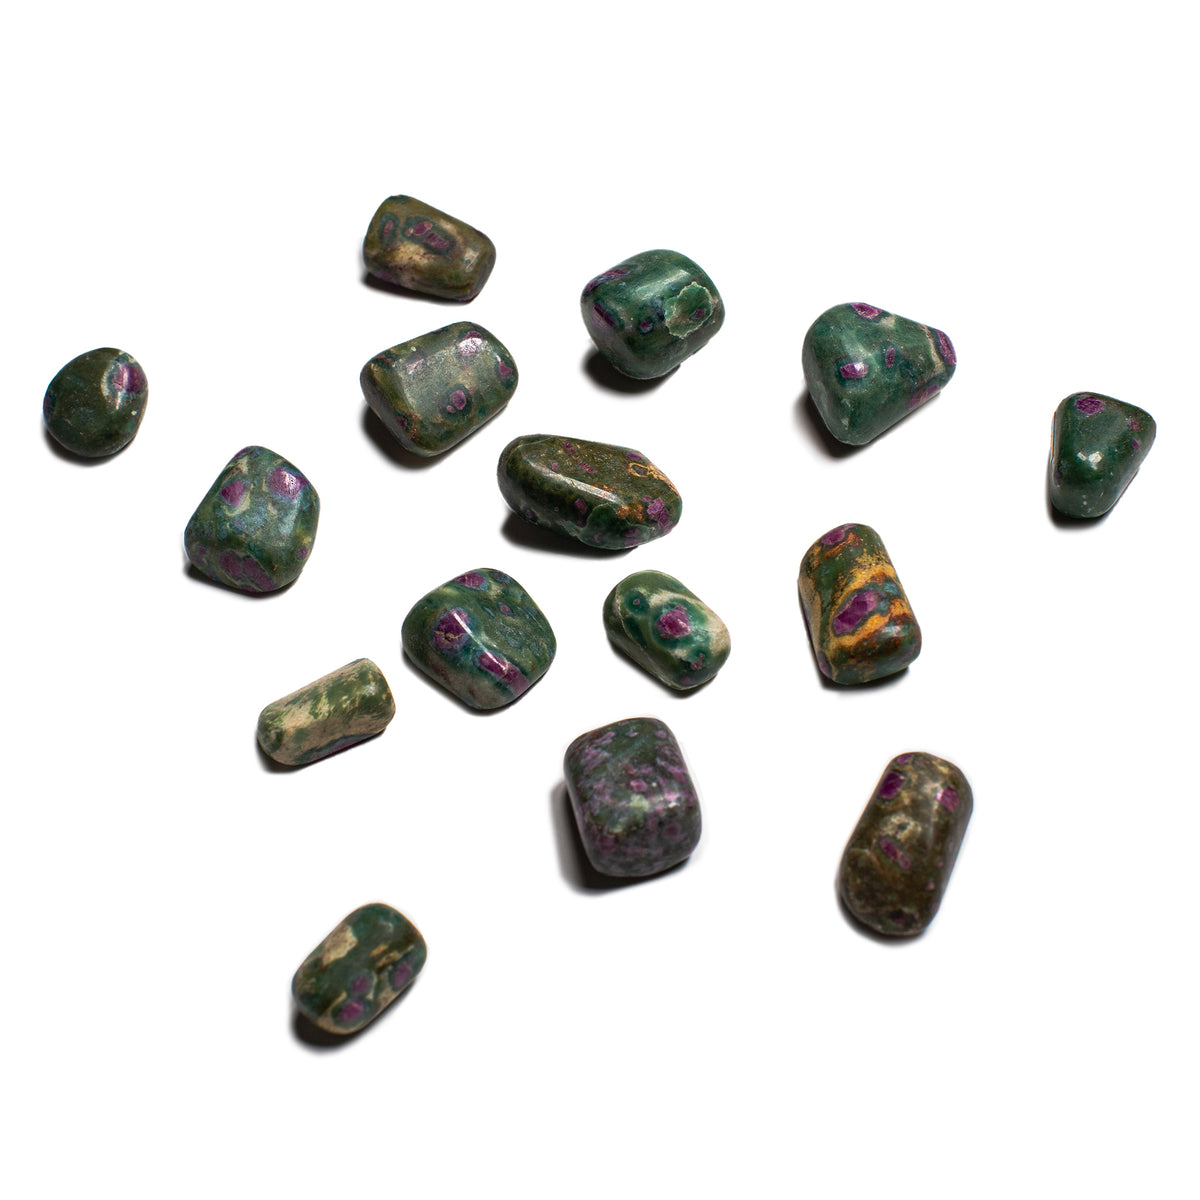 Tumbled Ruby in Zoisite Stones